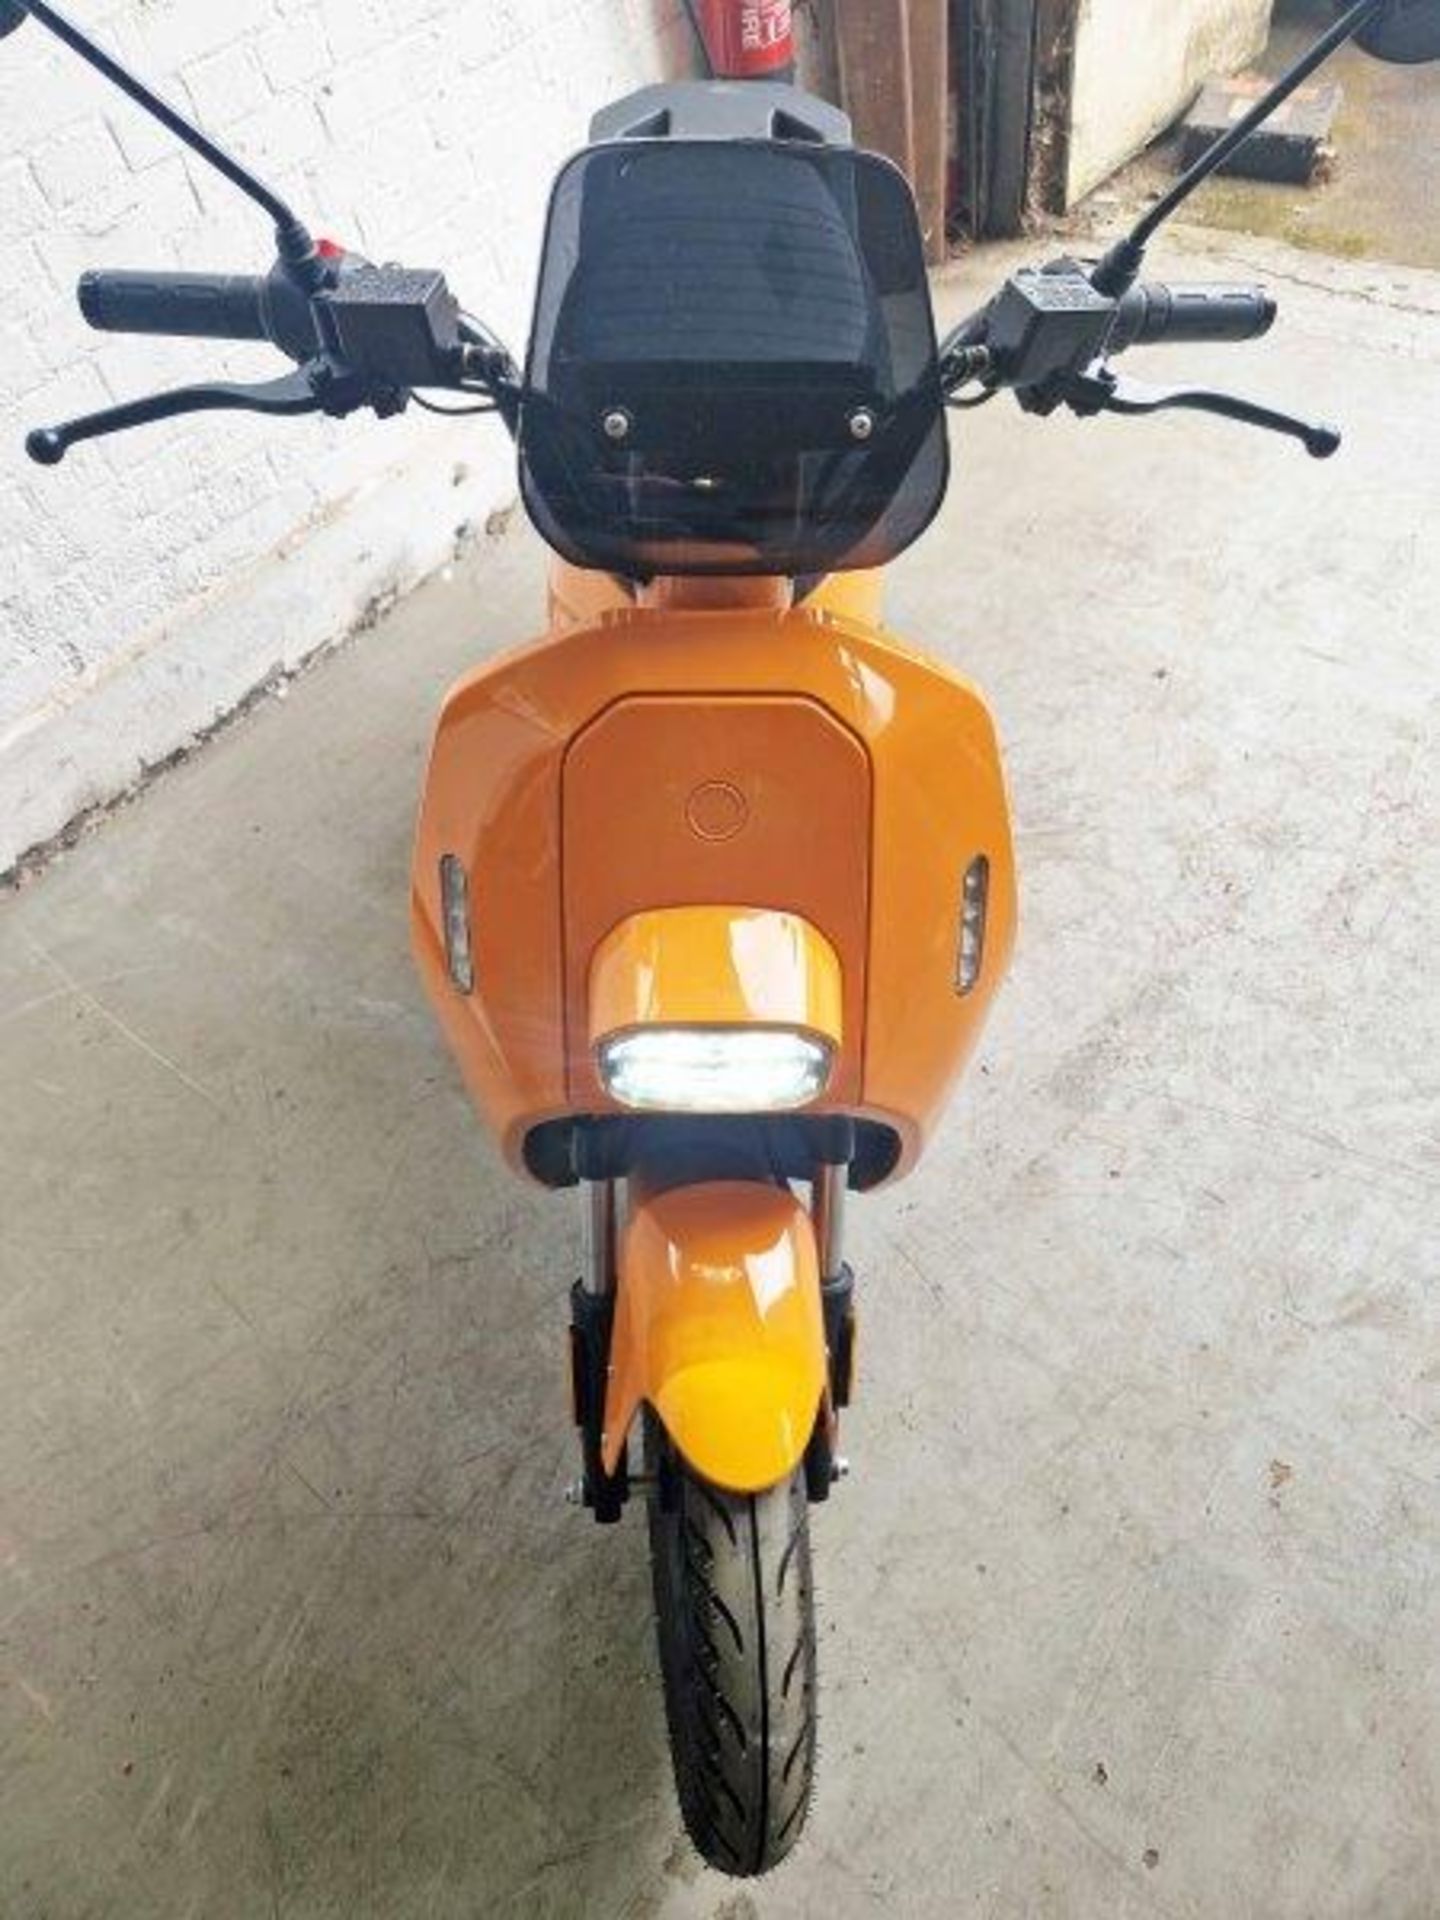 VMOTO VS2 L1e-b Electric Moped in Orange. Boxed, Unused and Unregistered, requiring some assembly, - Image 3 of 11